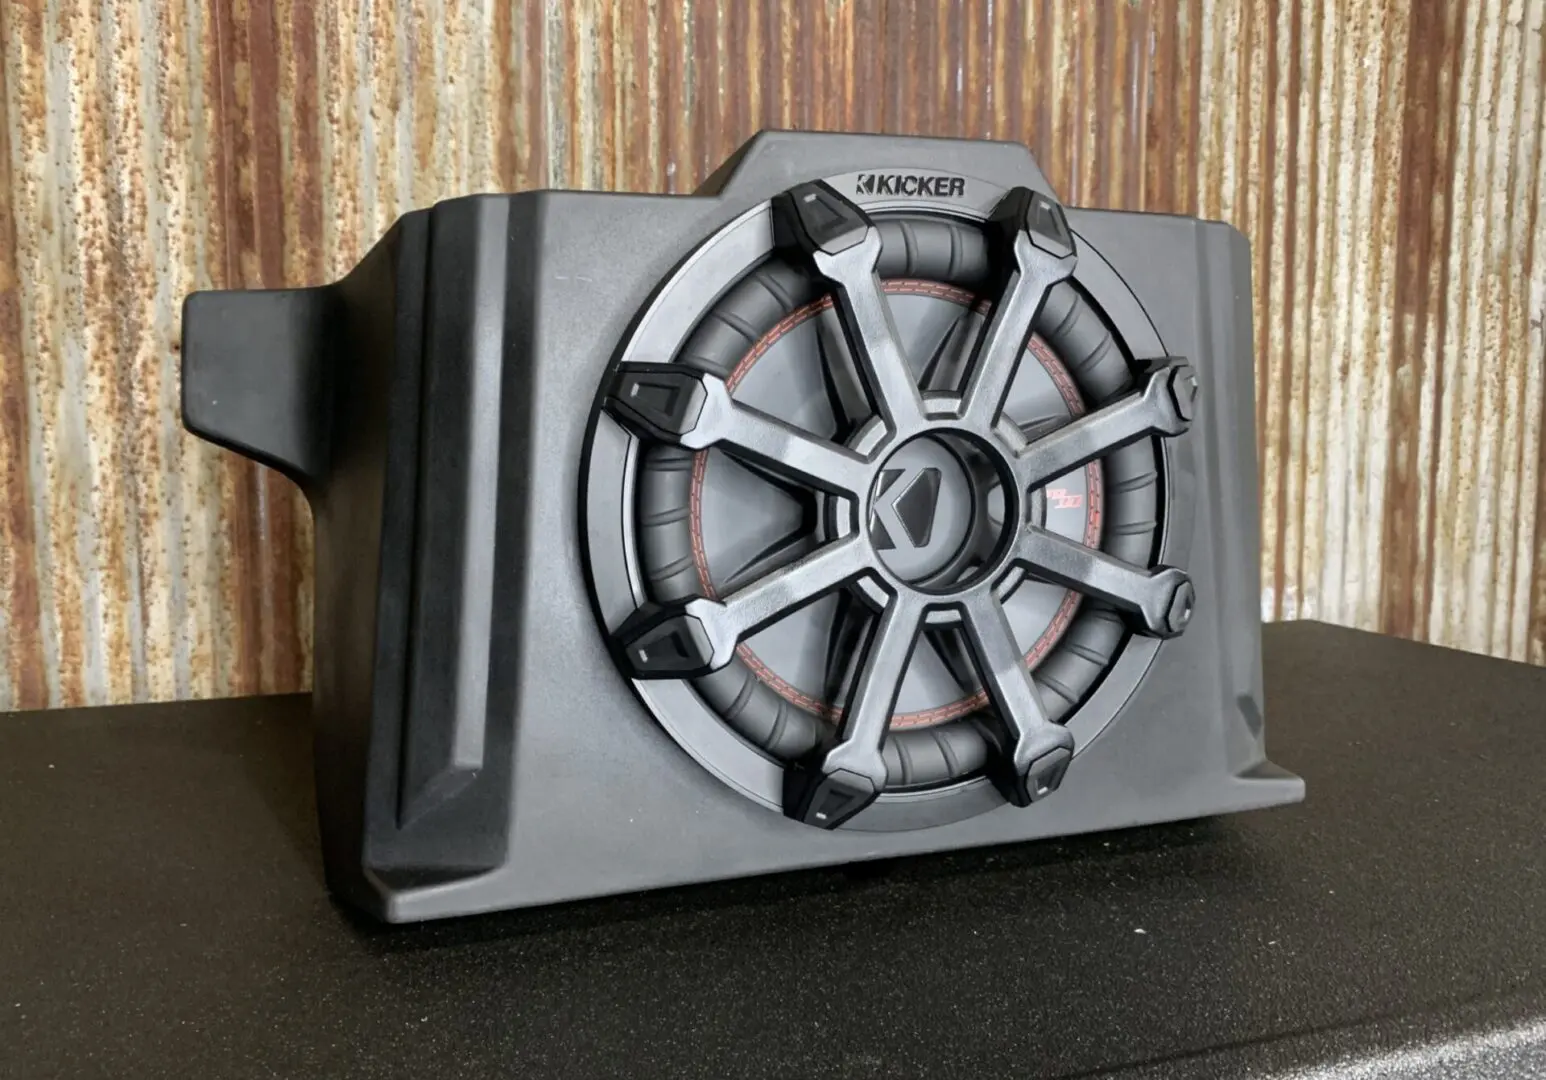 A kicker 8 inch subwoofer on display